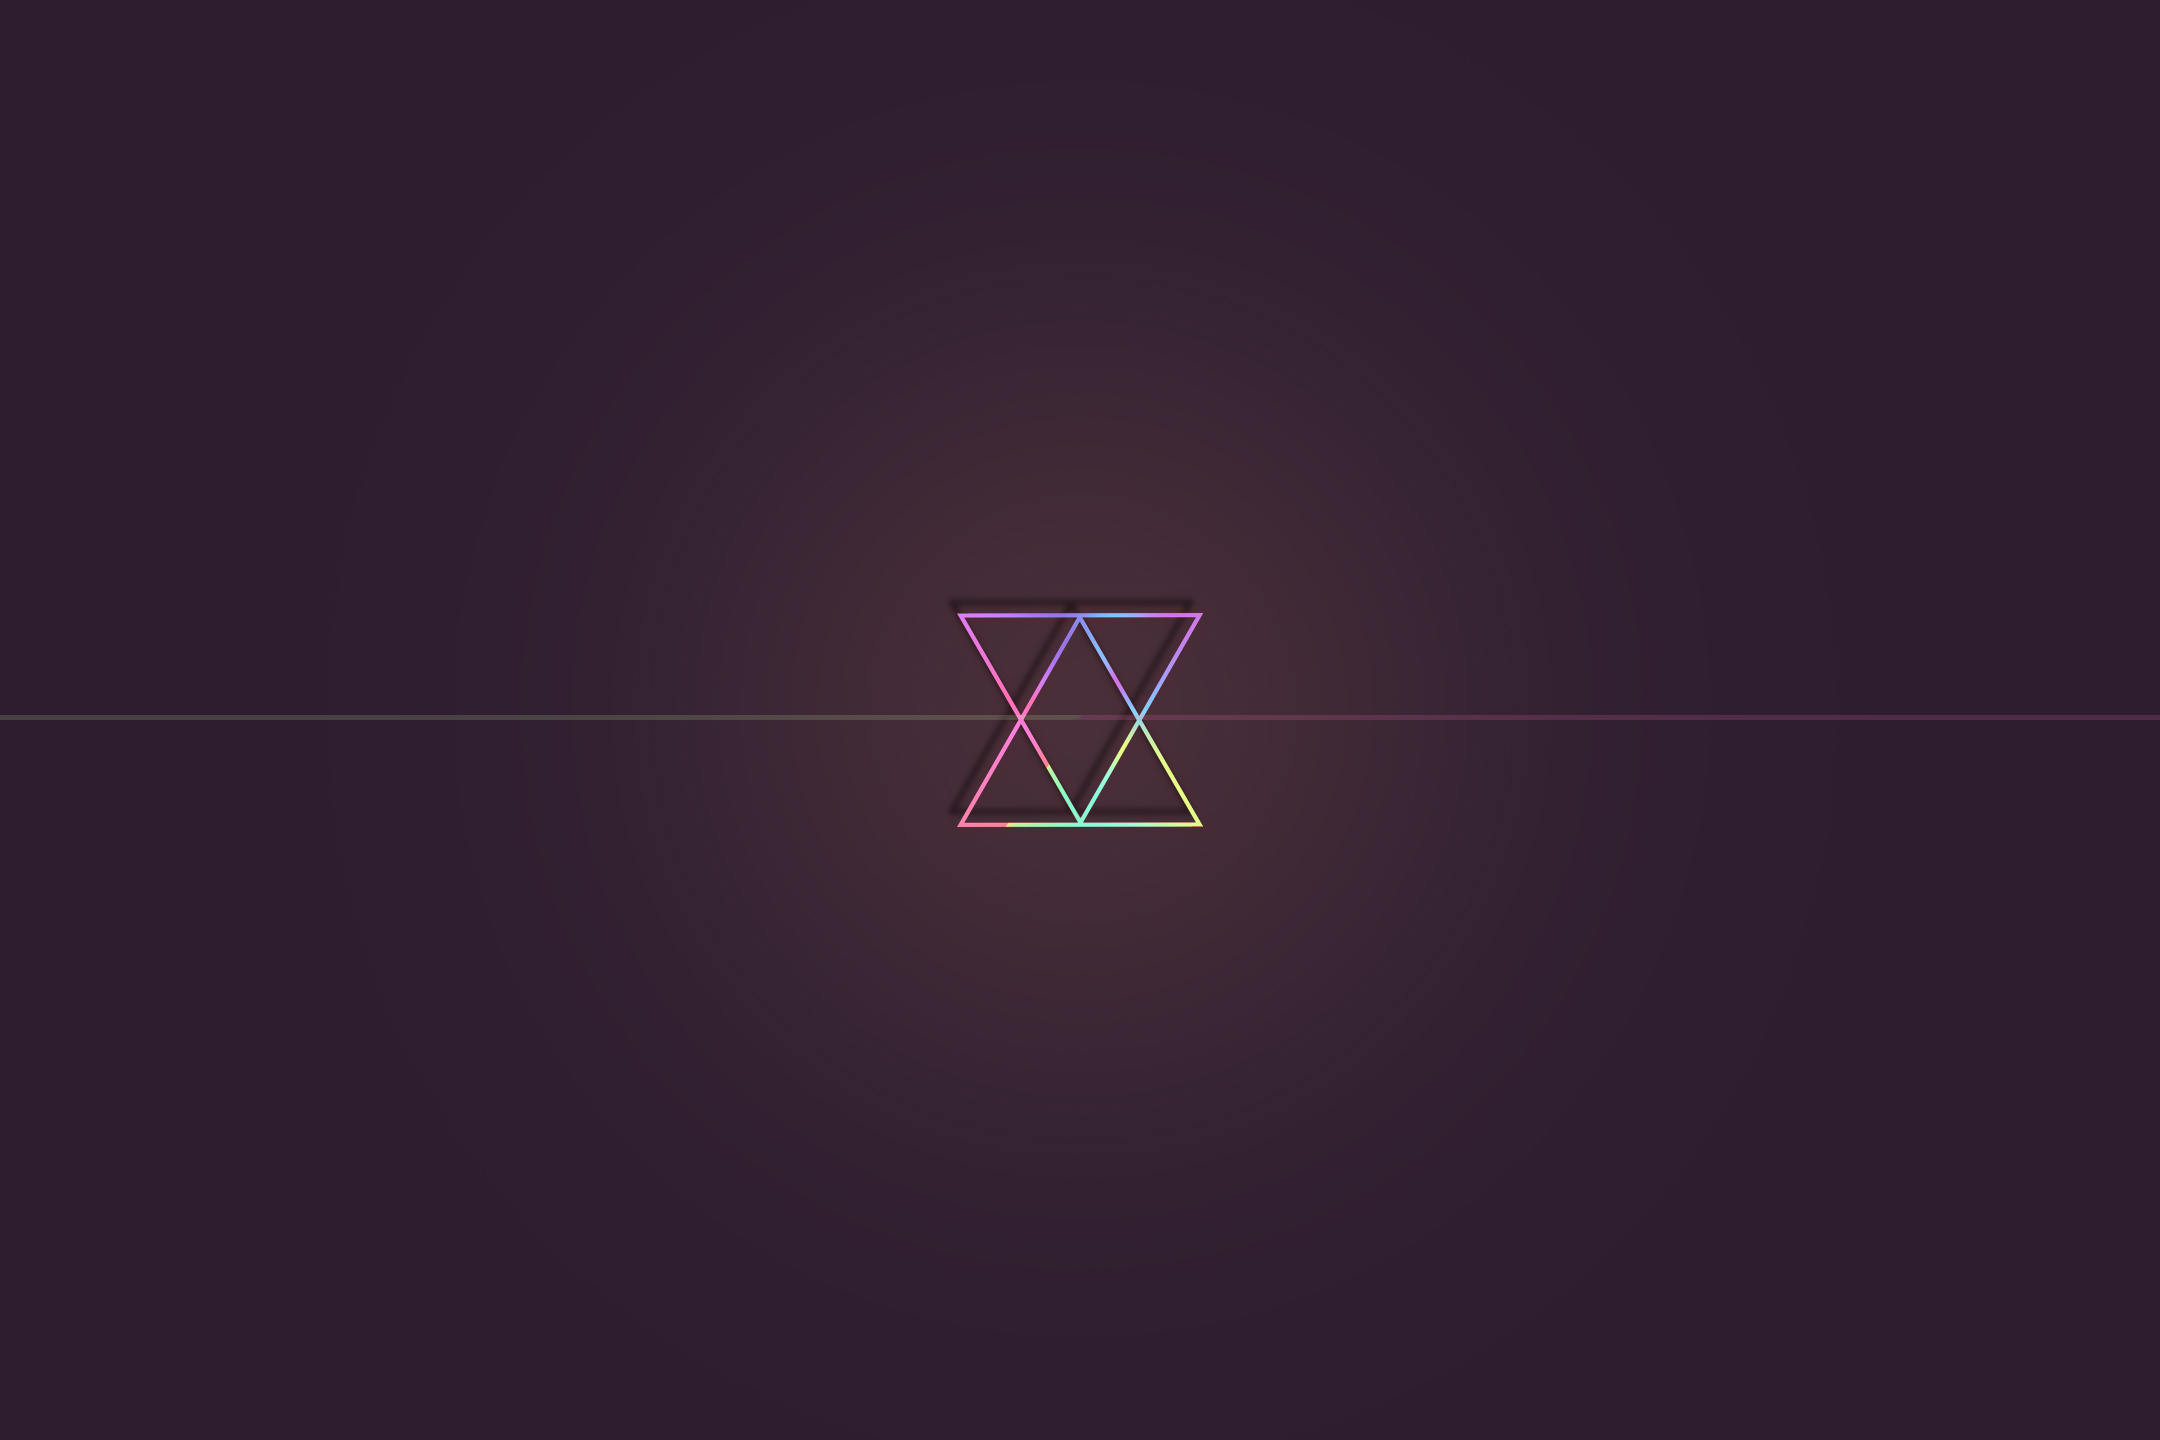 General 2160x1440 triangle symmetry simple background purple background